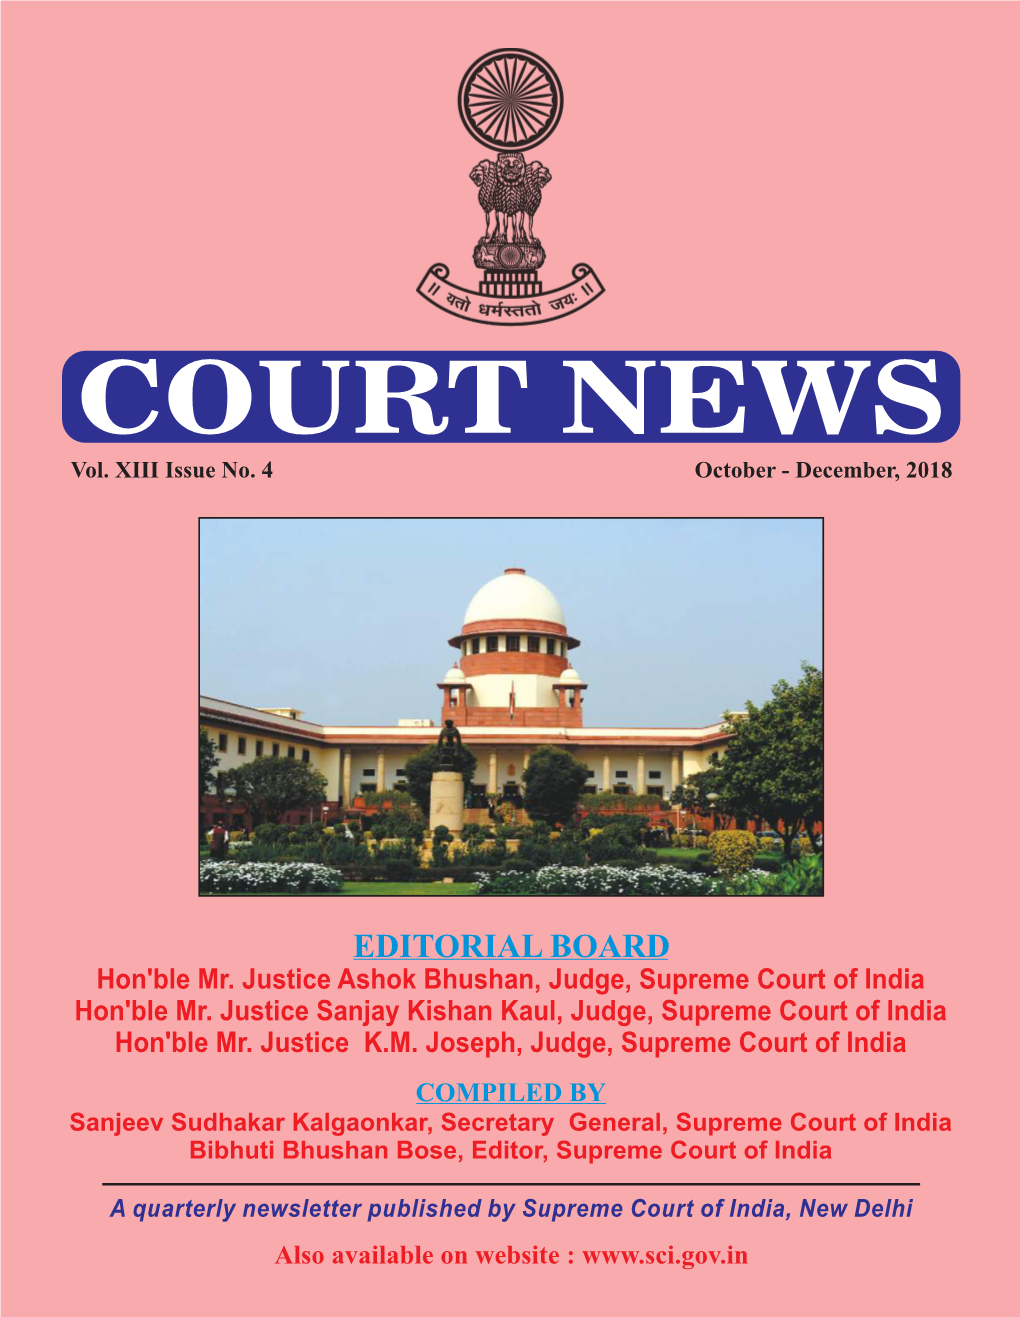 Court News Vol. XIII, Issue No.4